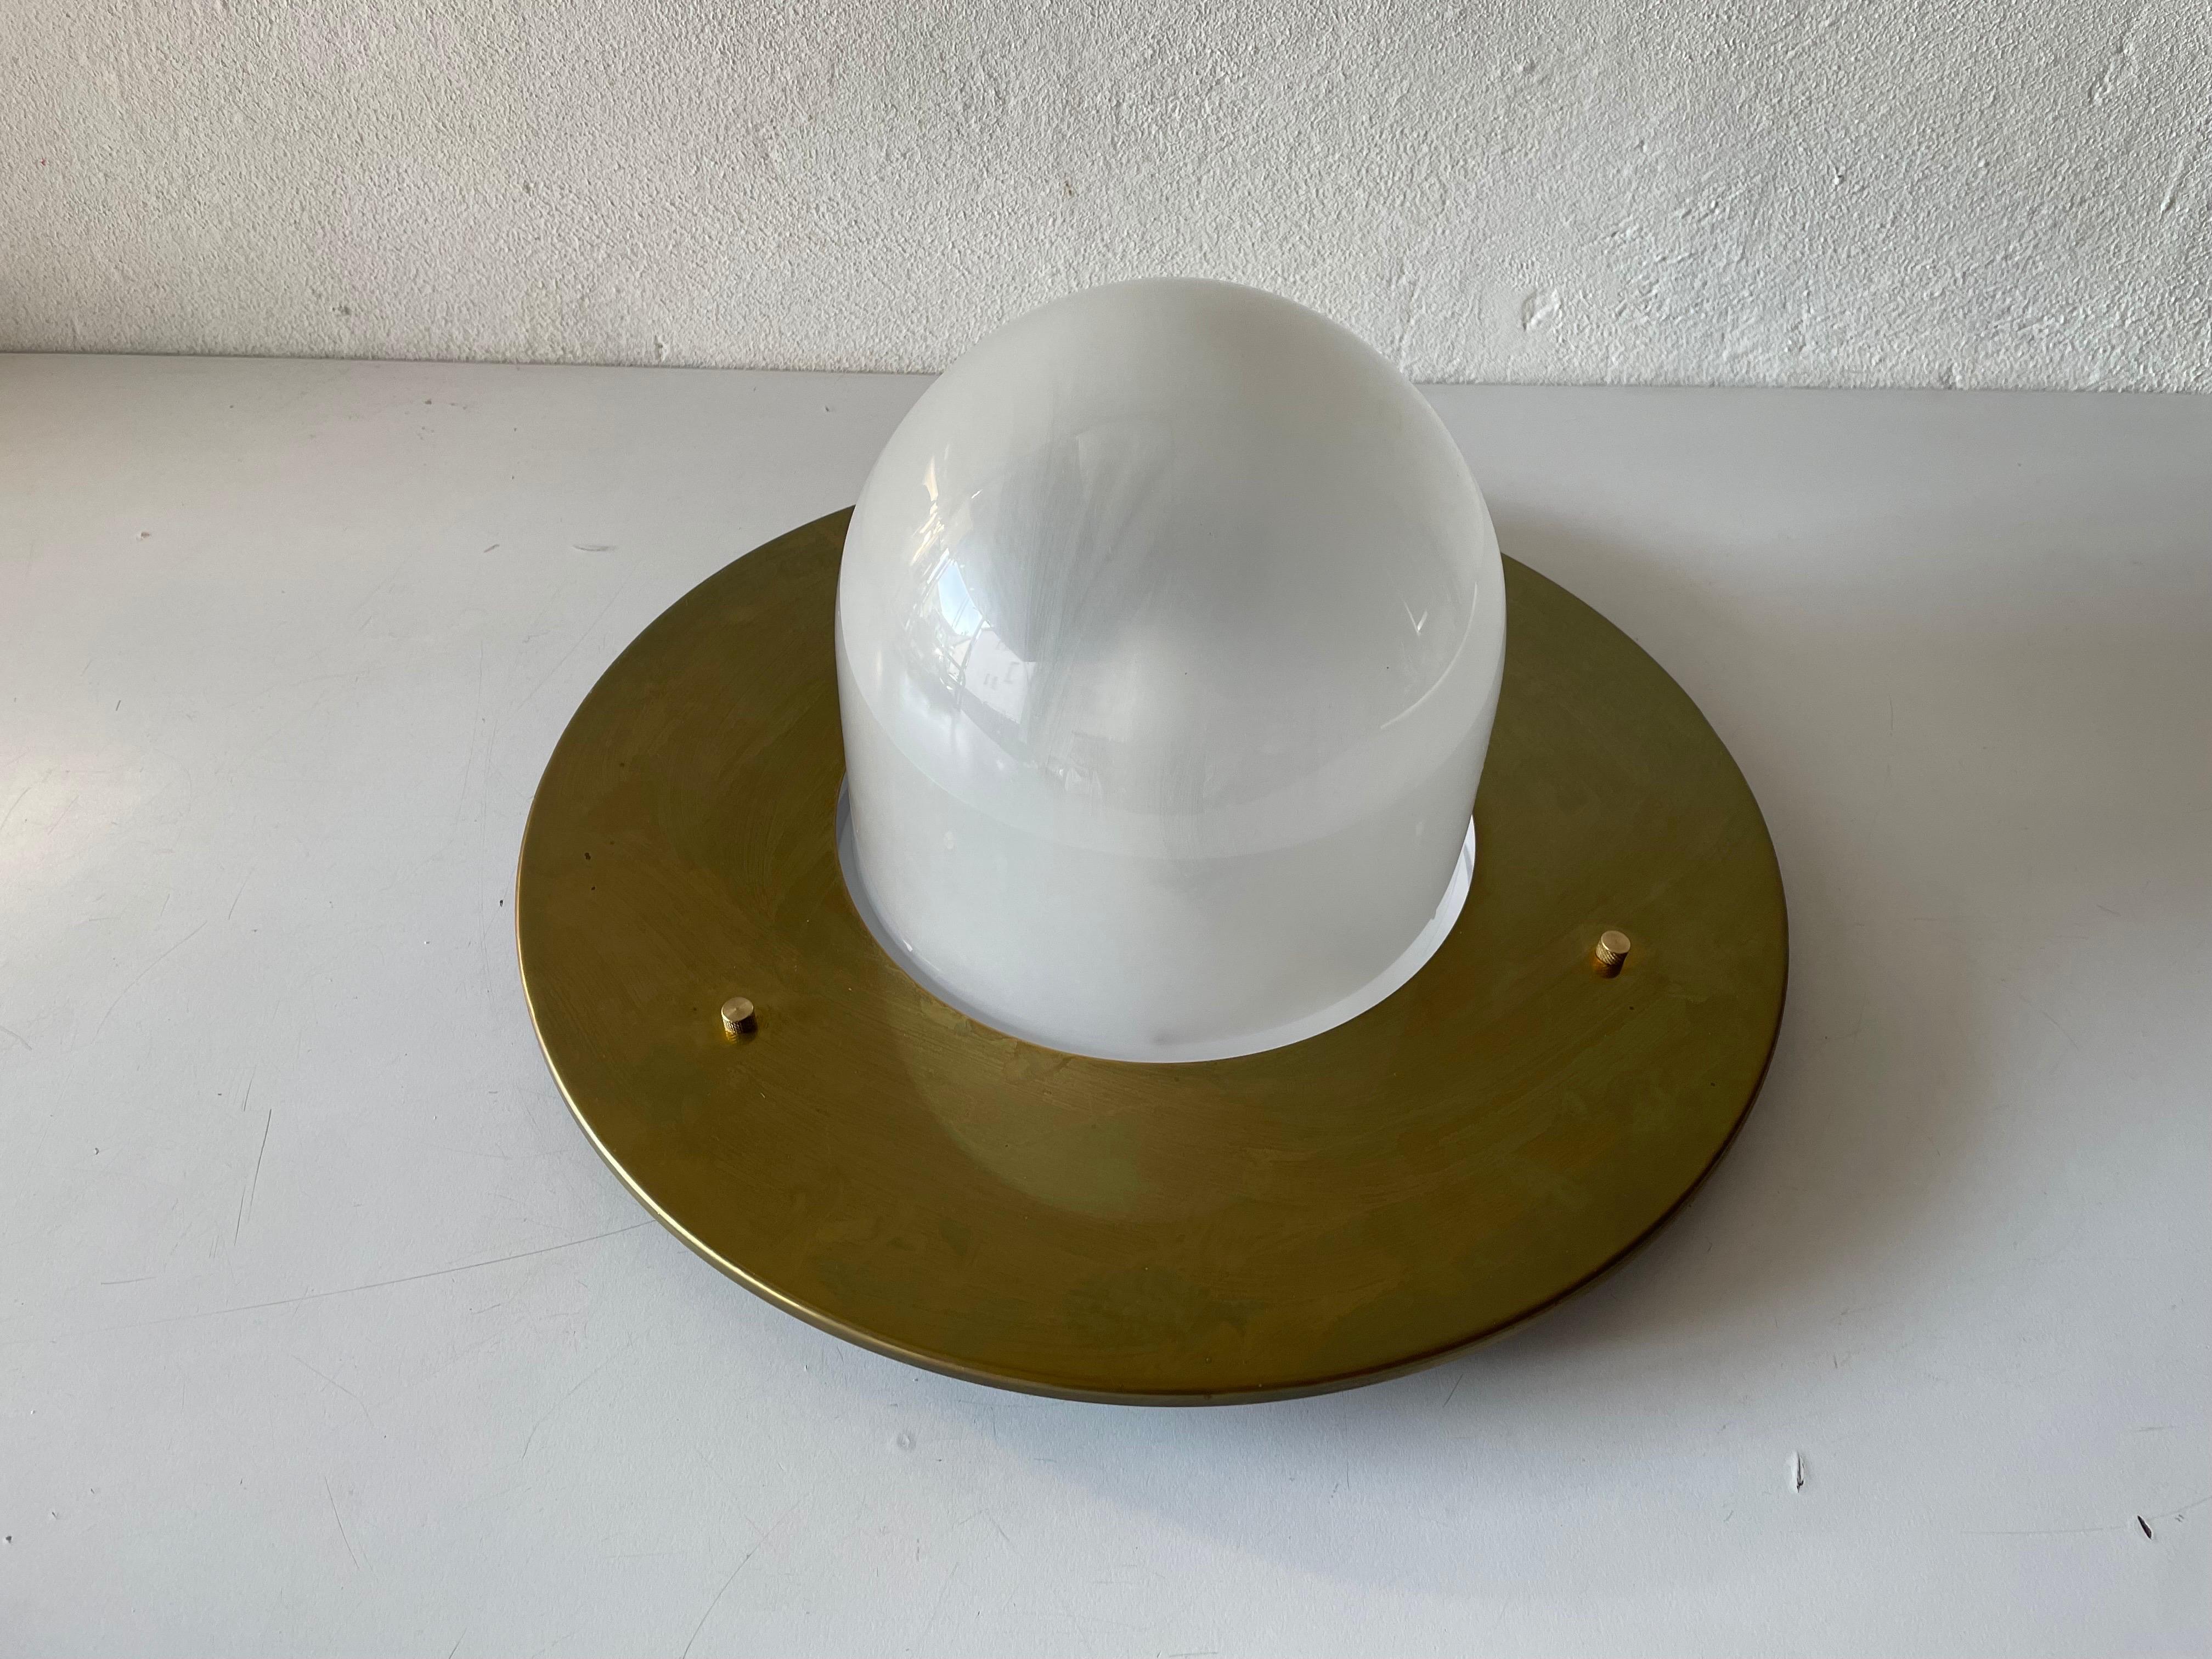 Ufo design glass and brass flush mount by Quattrifolio, 1970s, Italy.
Bulbo Grande model.

Retains original manufacturers label. 

This lamp works with E27 light bulb.
Wired and suitable to use with 220V and 110V for all